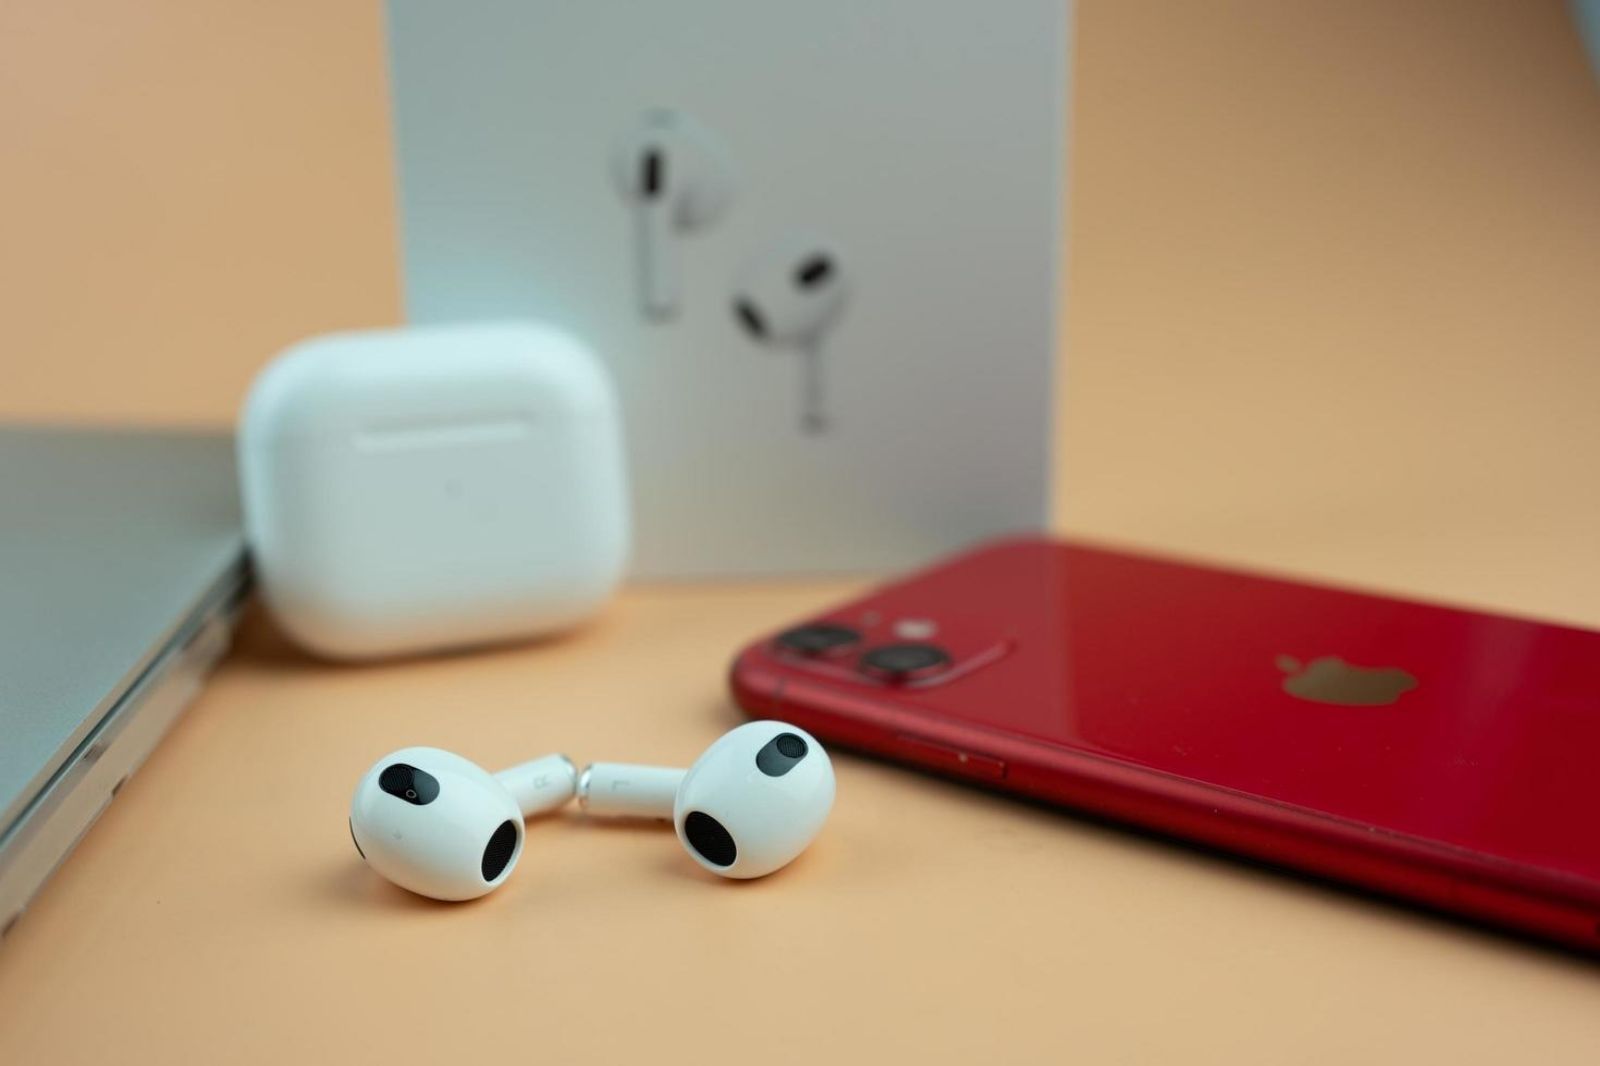 how-to-connect-airpods-to-iphone-11